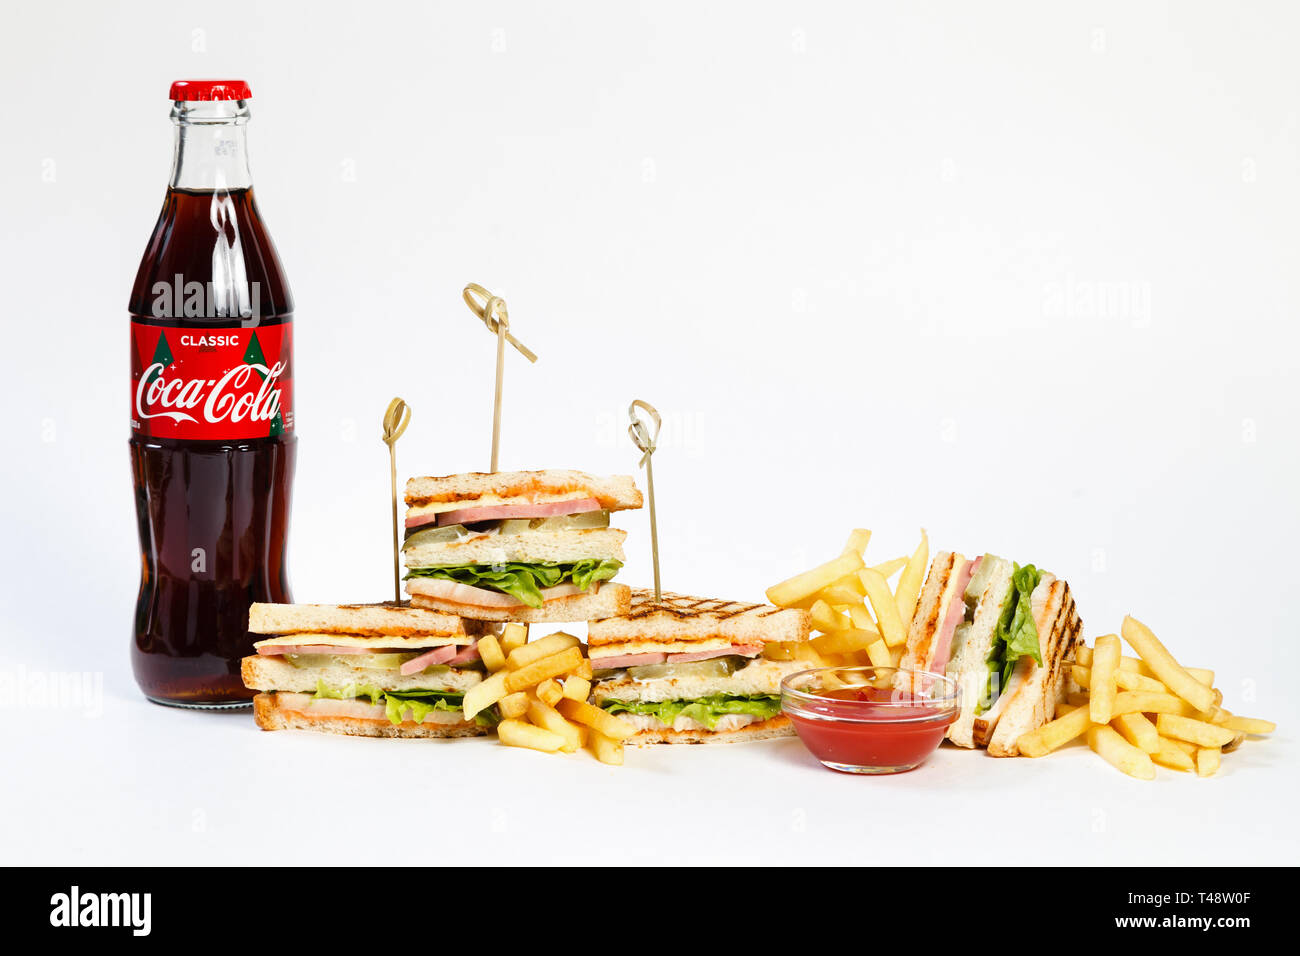 Photo session new menu of coffee house, fresh club sandwich, glass bottle  of Coca Cola, french fries and ketchup isolated on white background.  Concept Stock Photo - Alamy